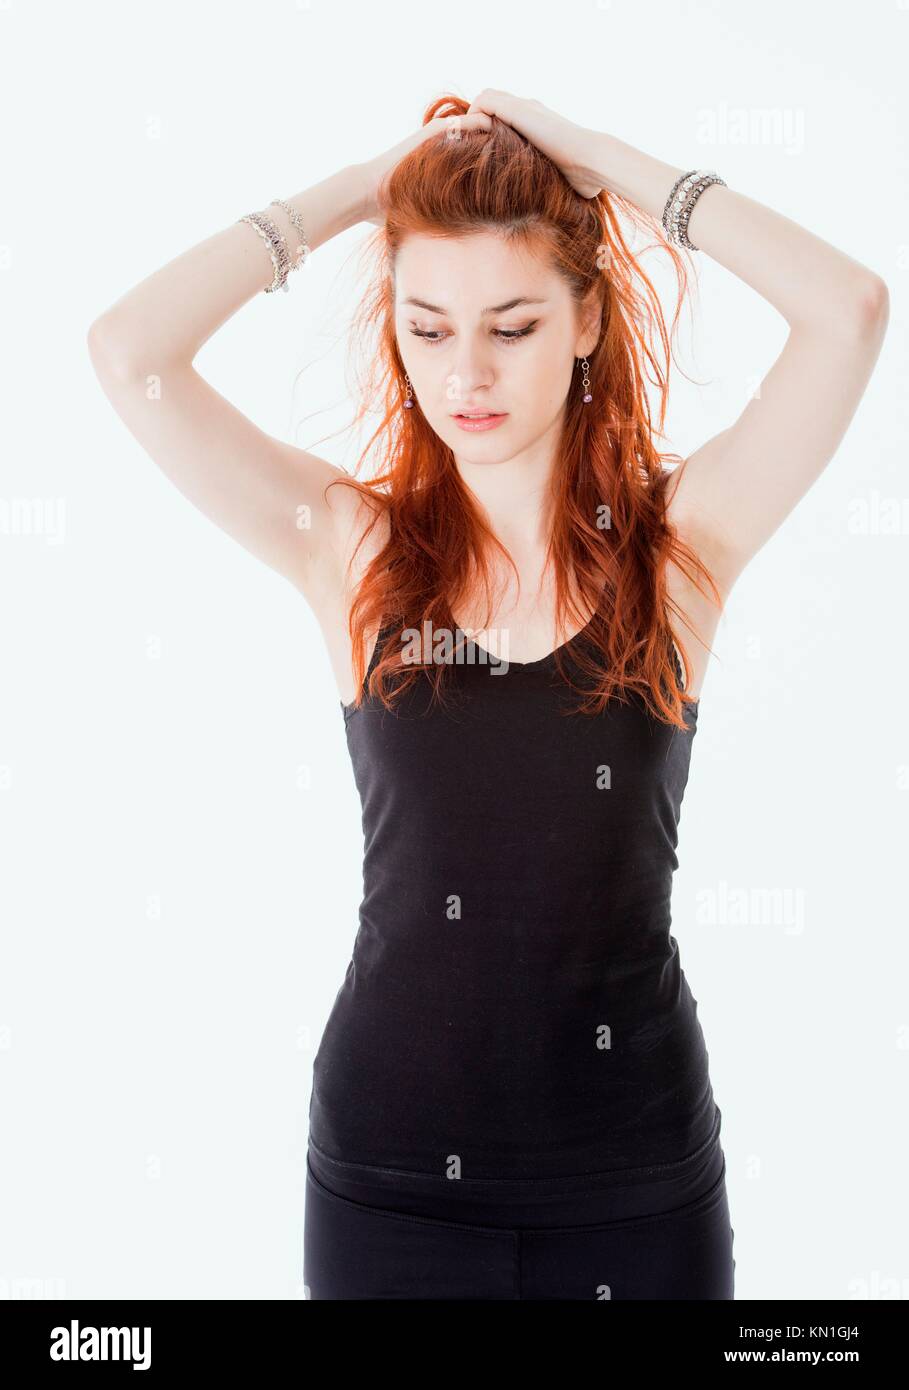 Portrait of attractive young woman with red hair and black dress. Stock Photo